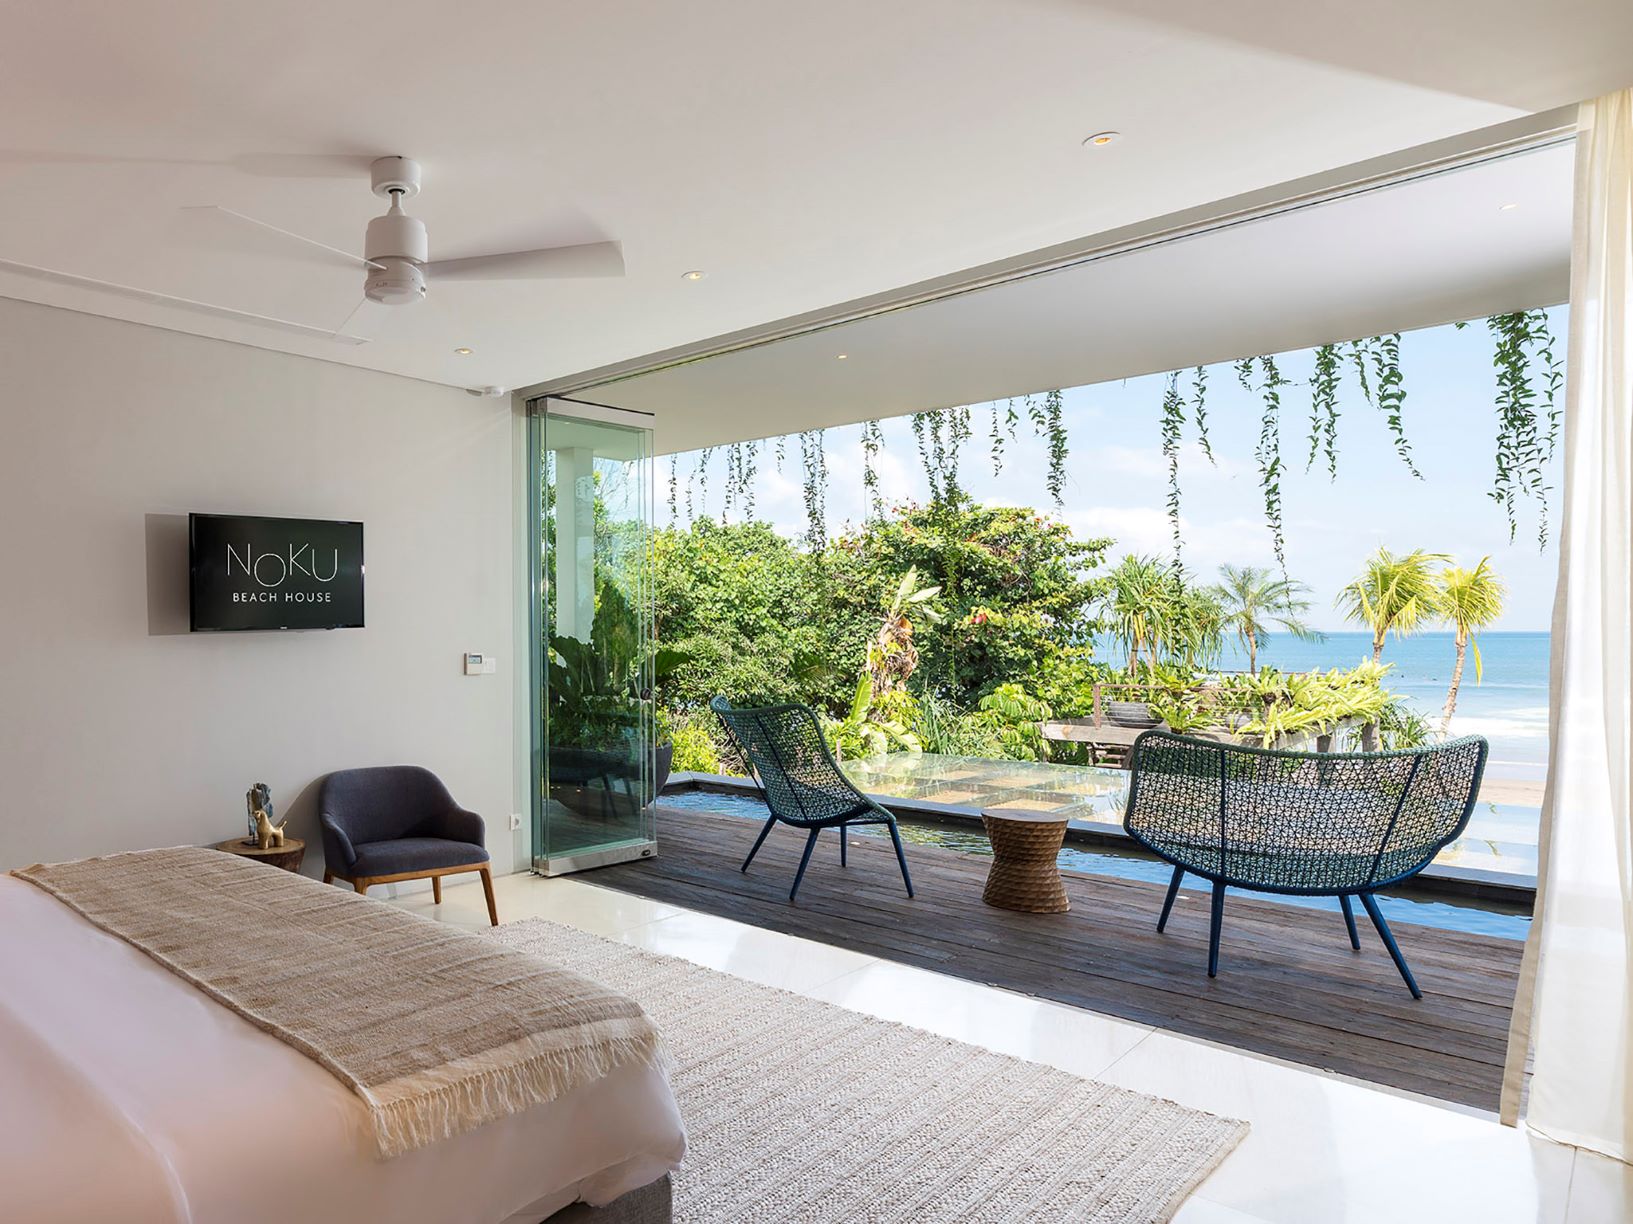 Noku Beach House - Marvelous view from bedroom